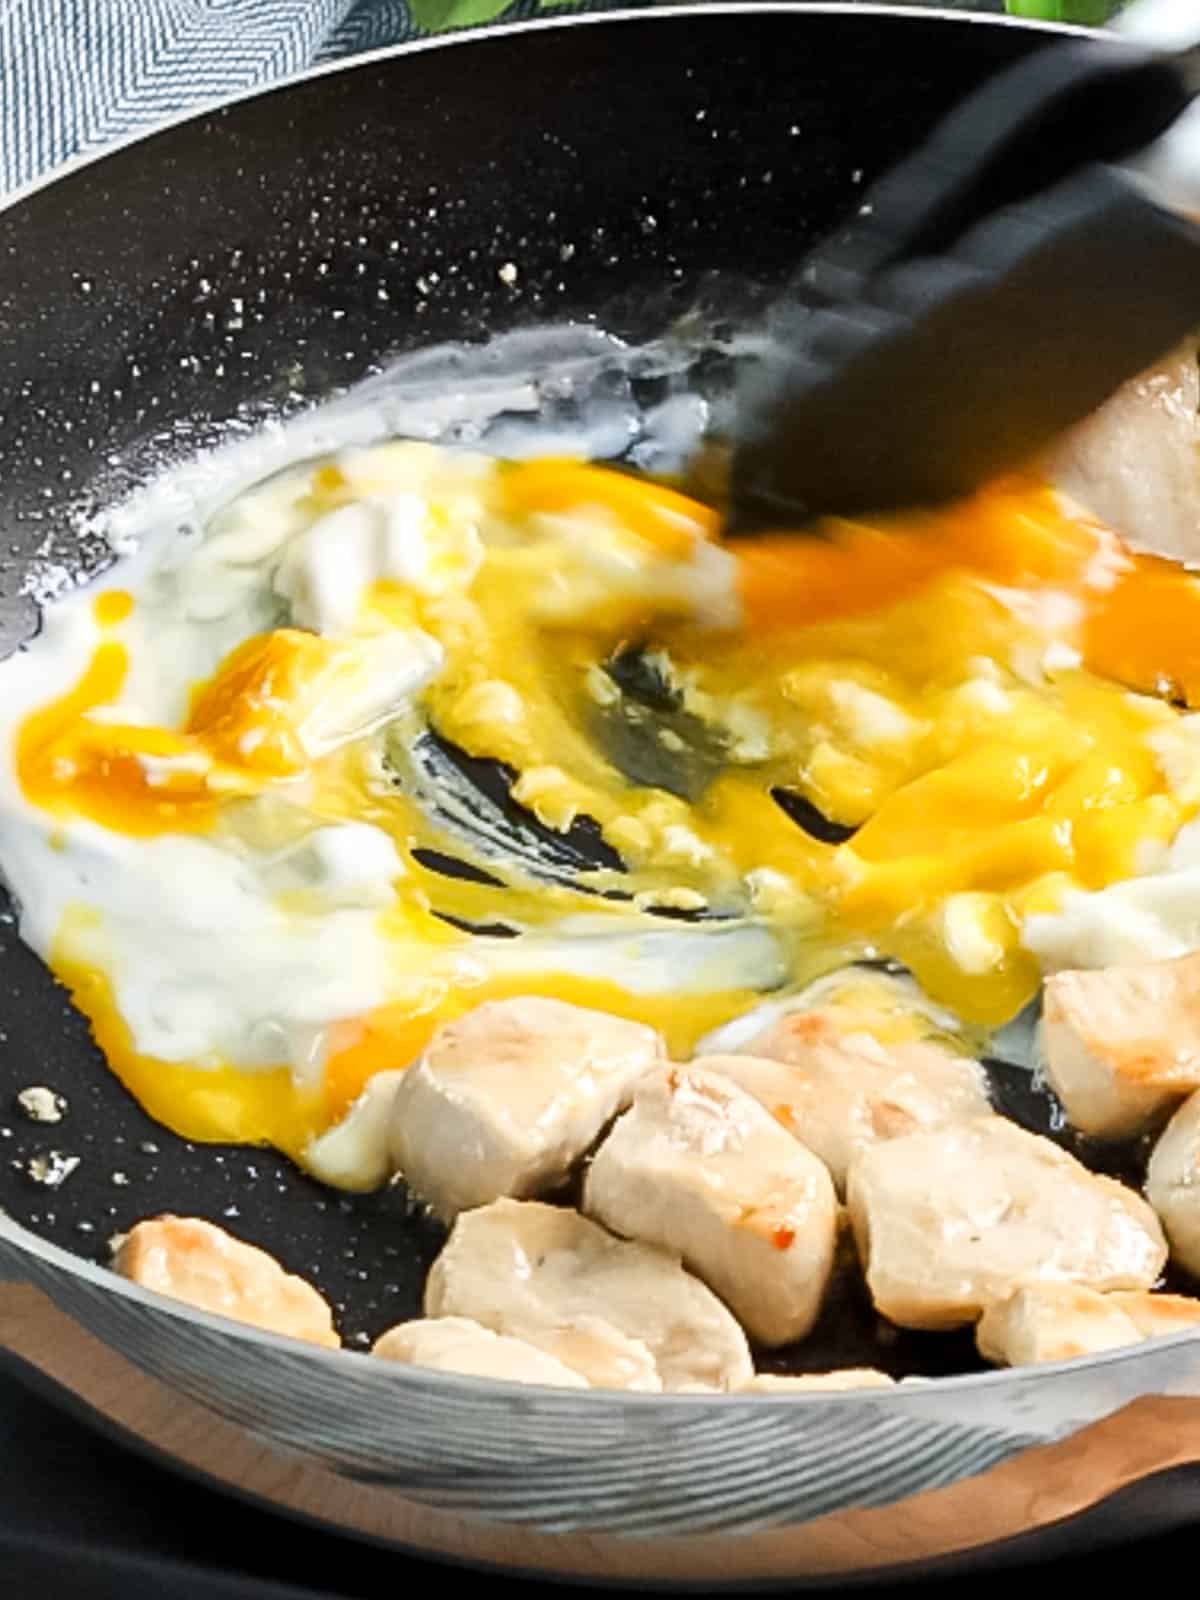 Frying and scrambling eggs in a pan with chicken.